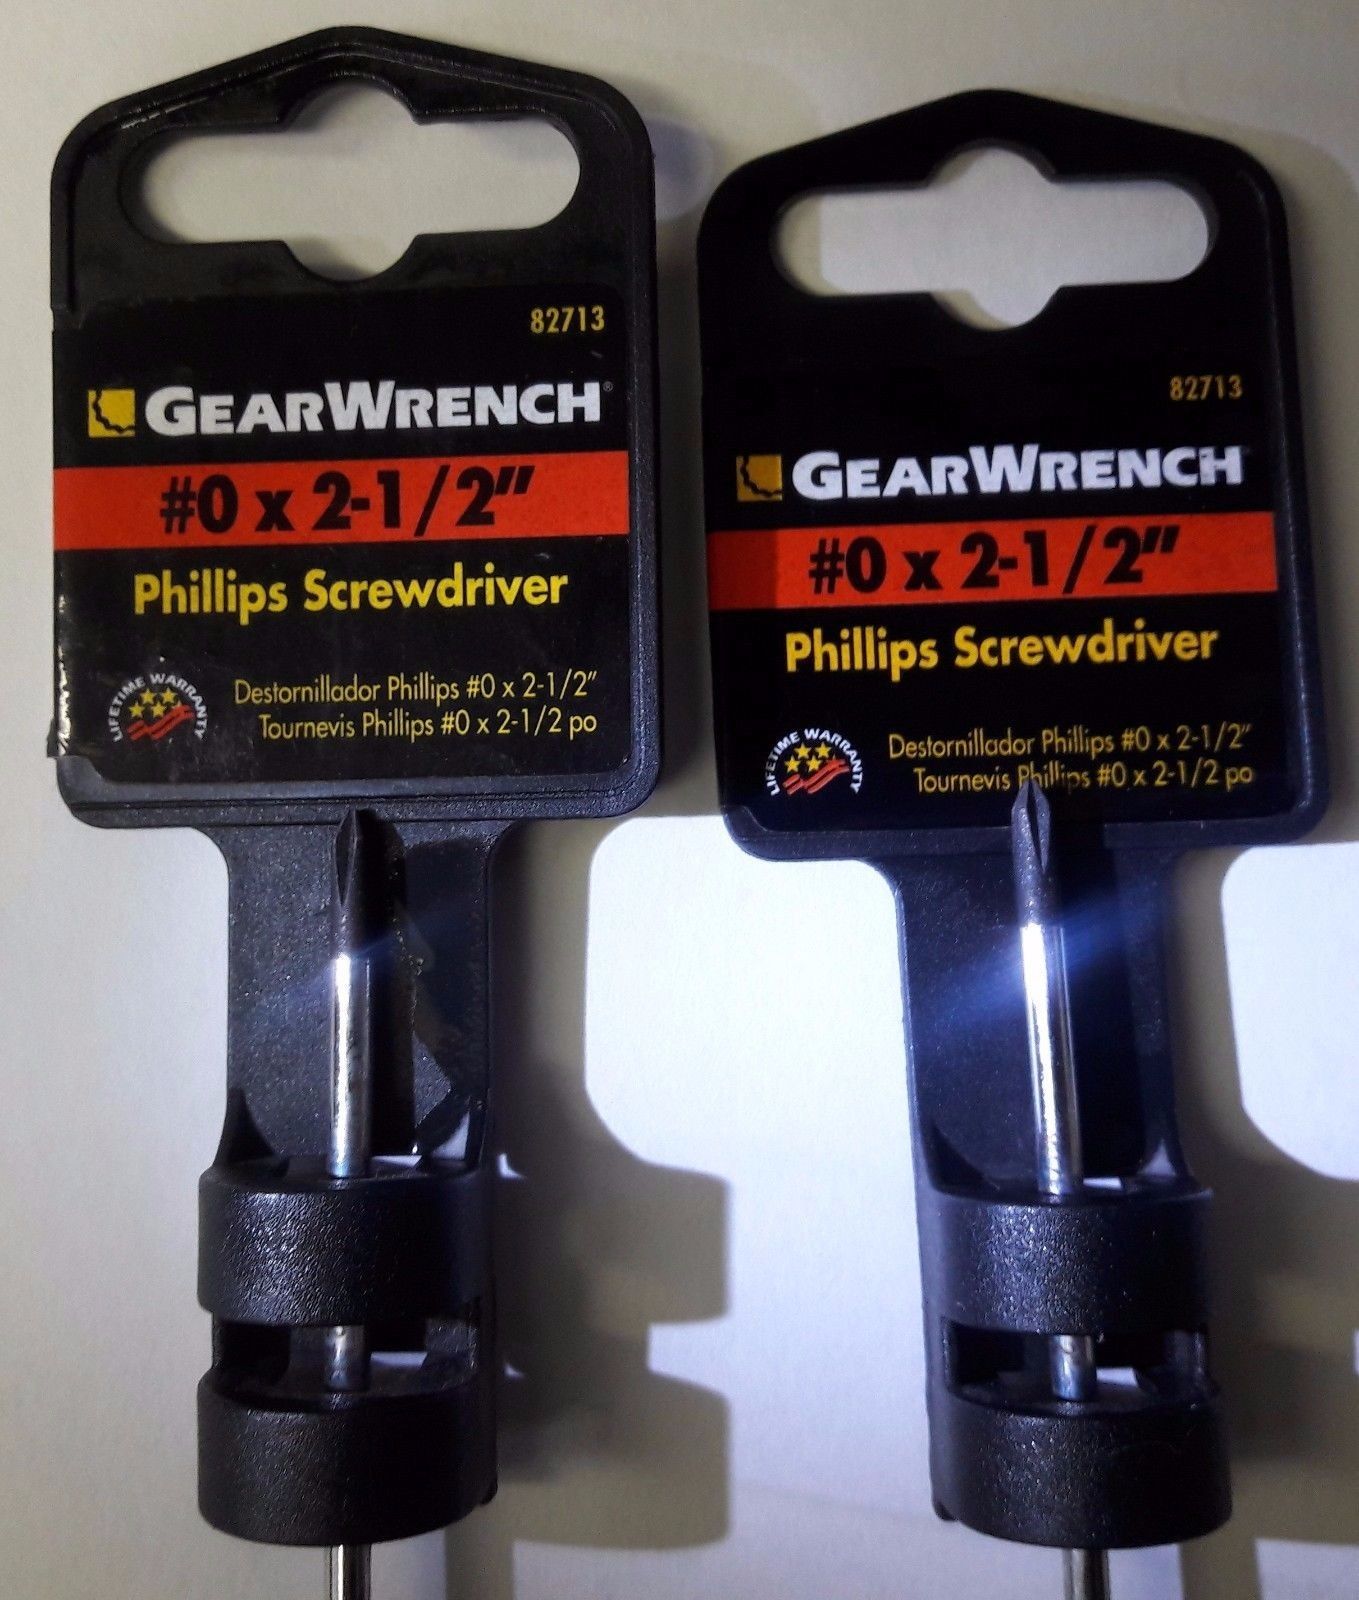 GearWrench #0 x 2-1/2" Phillips Screwdriver 82713 2PCS